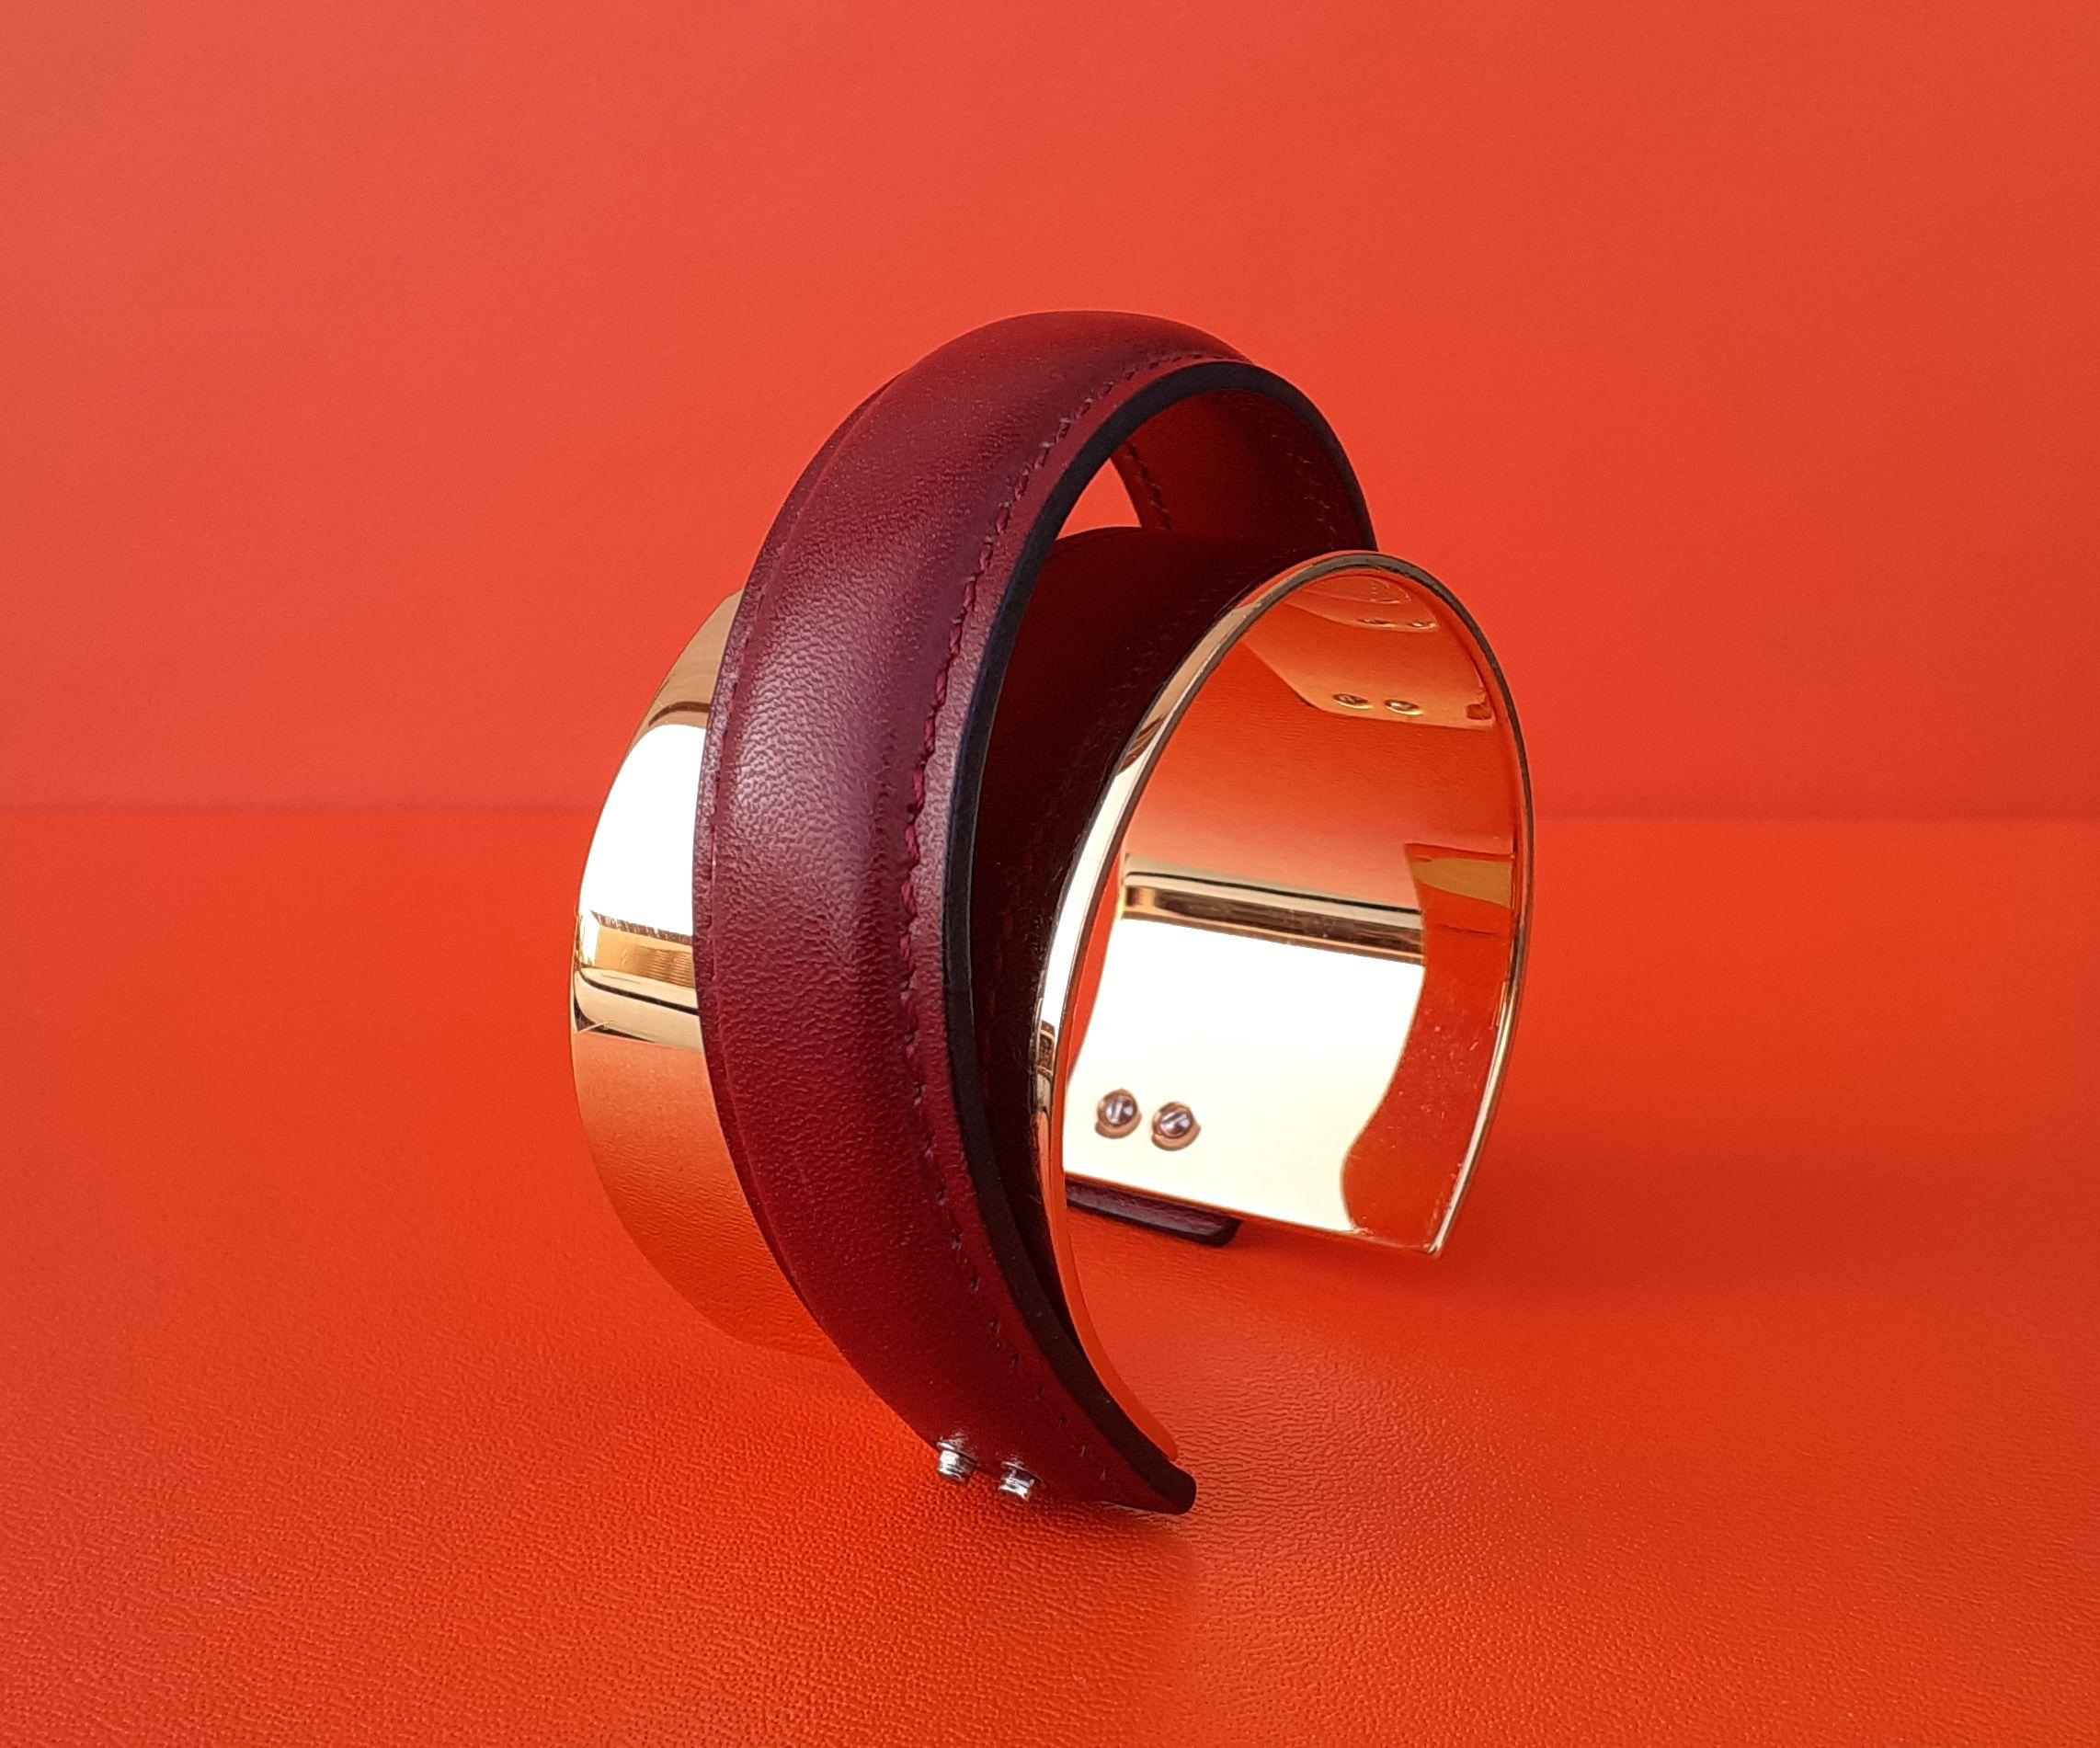 Exceptional Hermès Cuff Bracelet Golden Hdw and Rouge H Box Leather Size L For Sale 7